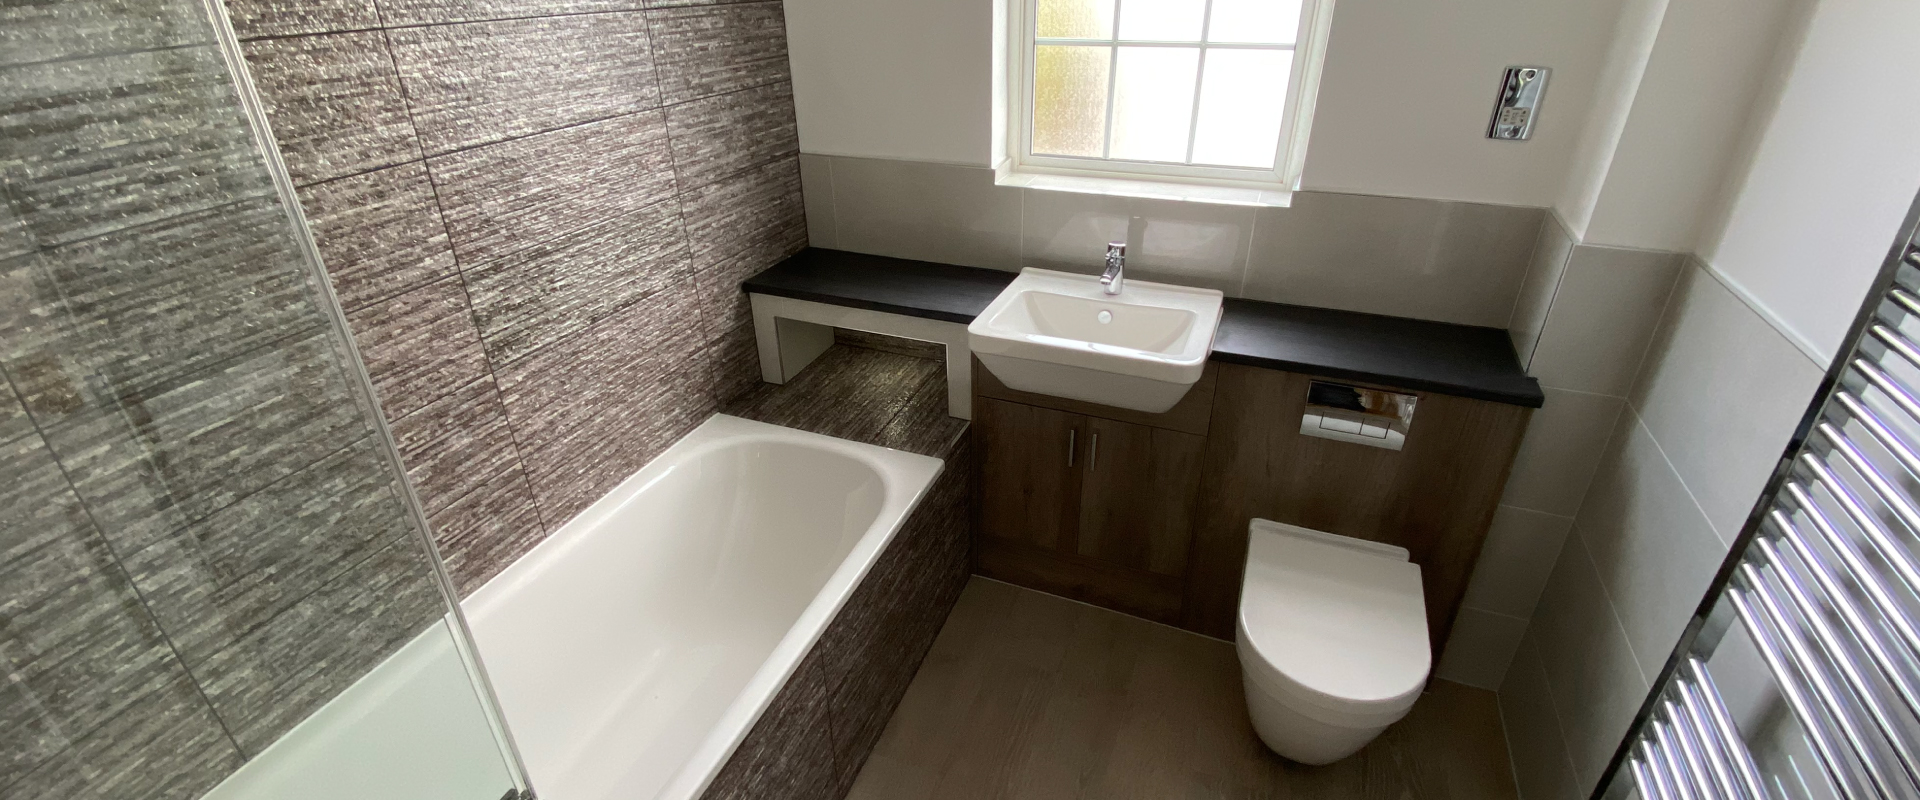 expert bathroom installers in high wycombe